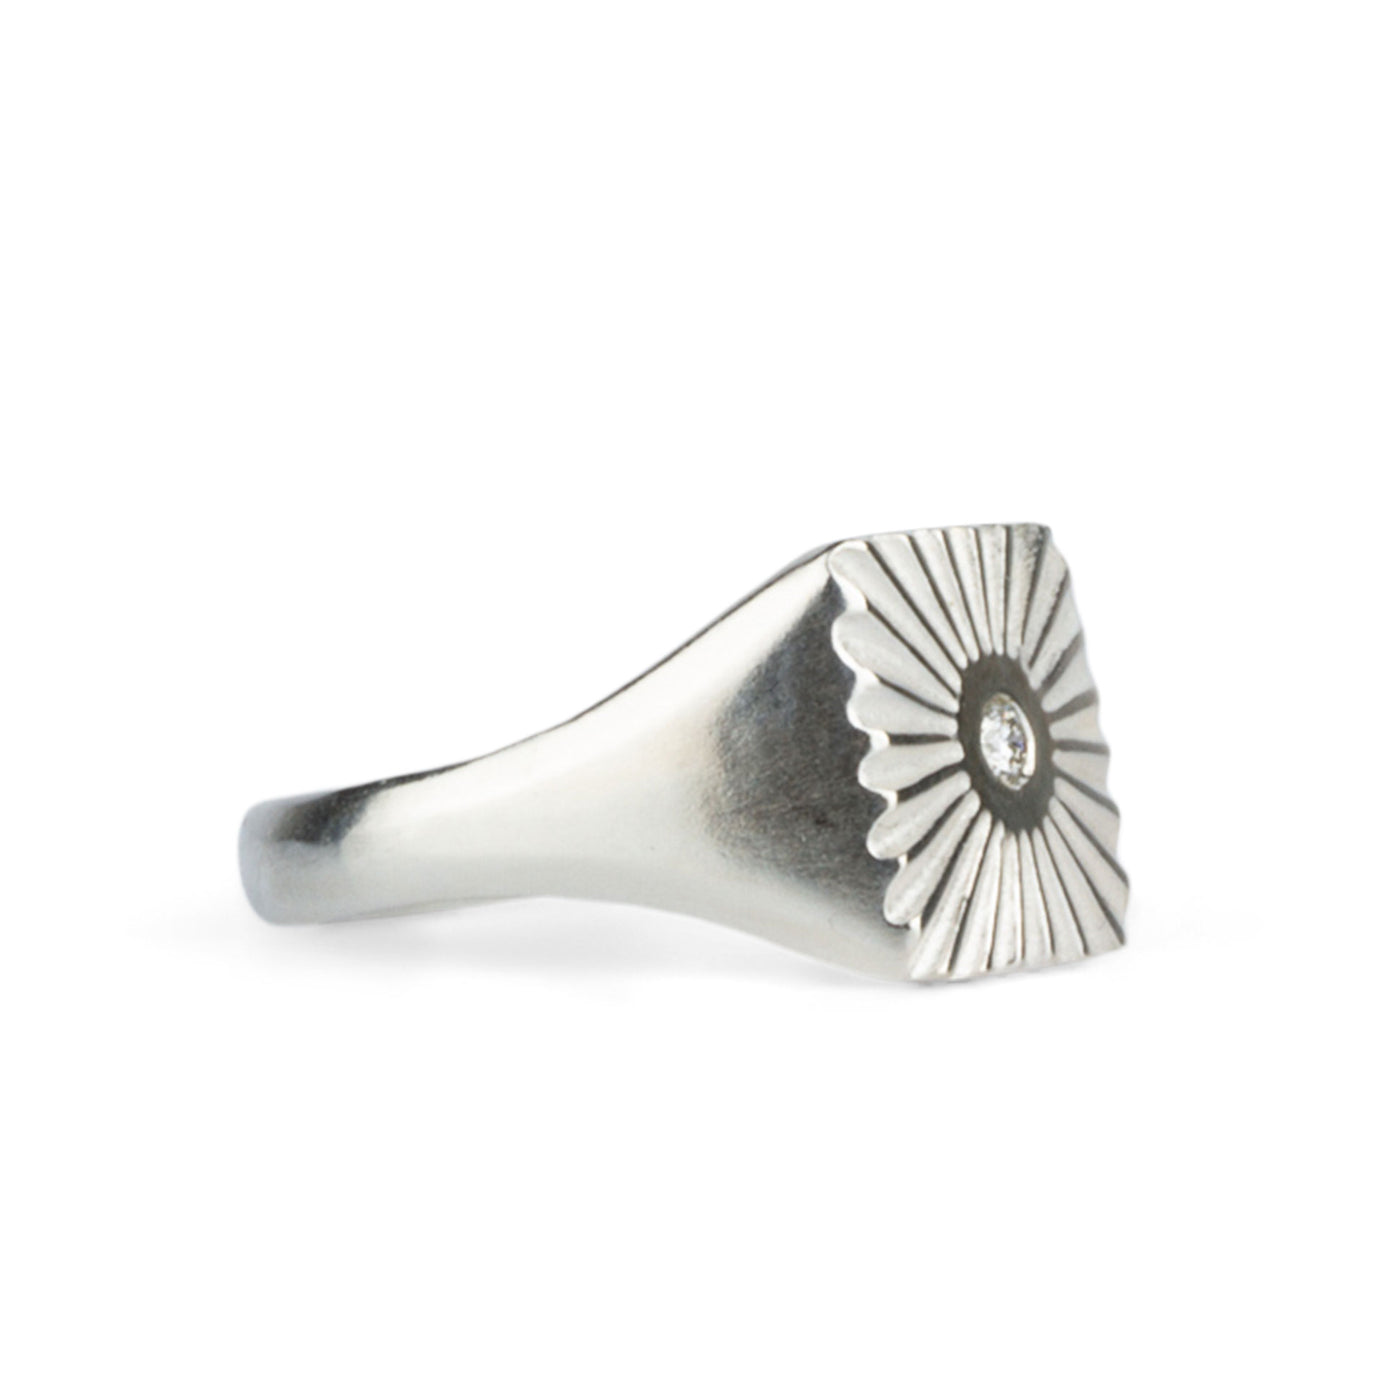 Side view of large silver square signet ring with a carved sunburst pattern and diamond center on a white background